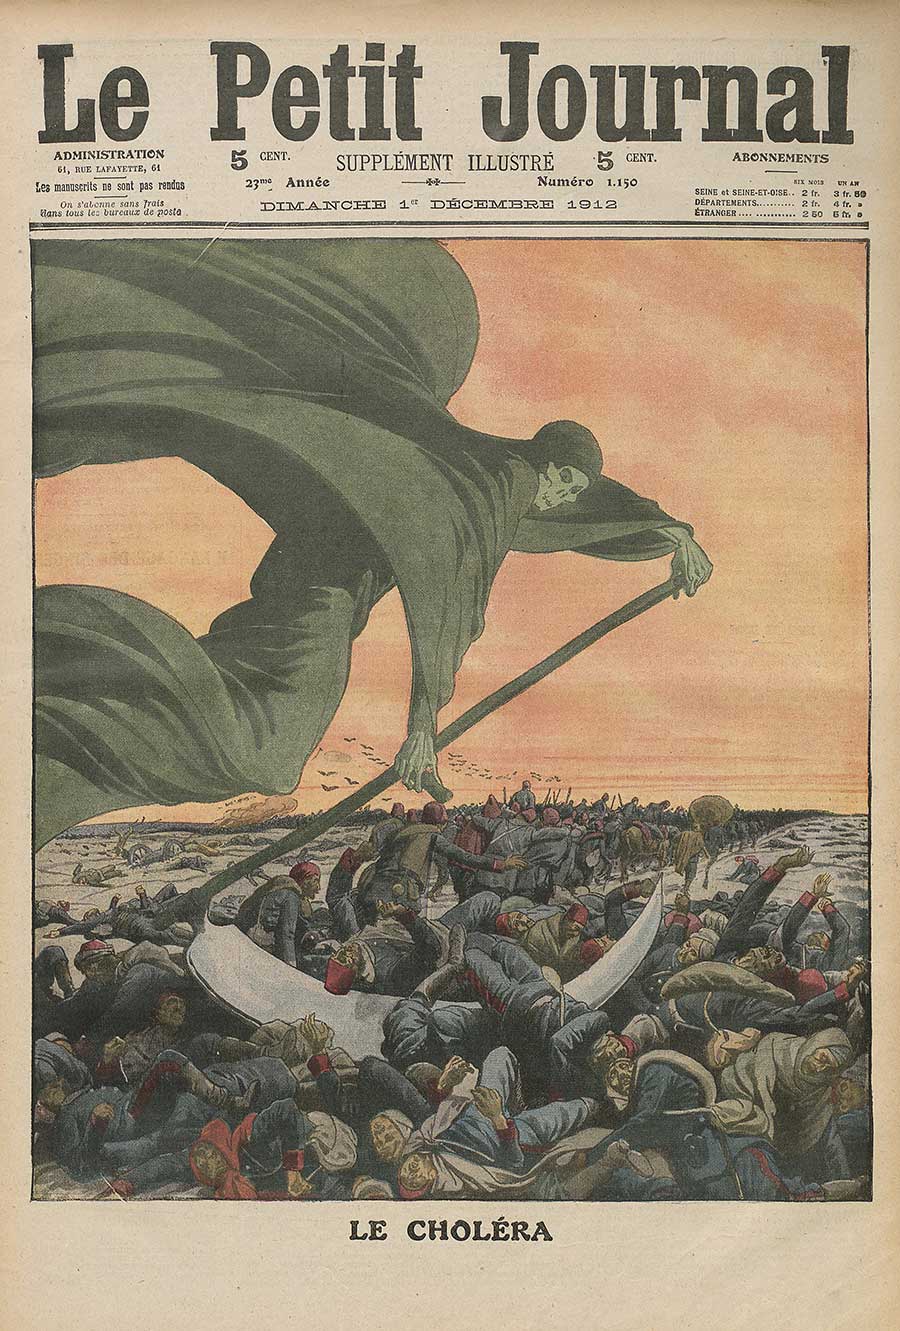 Drawing about the Cholera in Le Petit Journal.